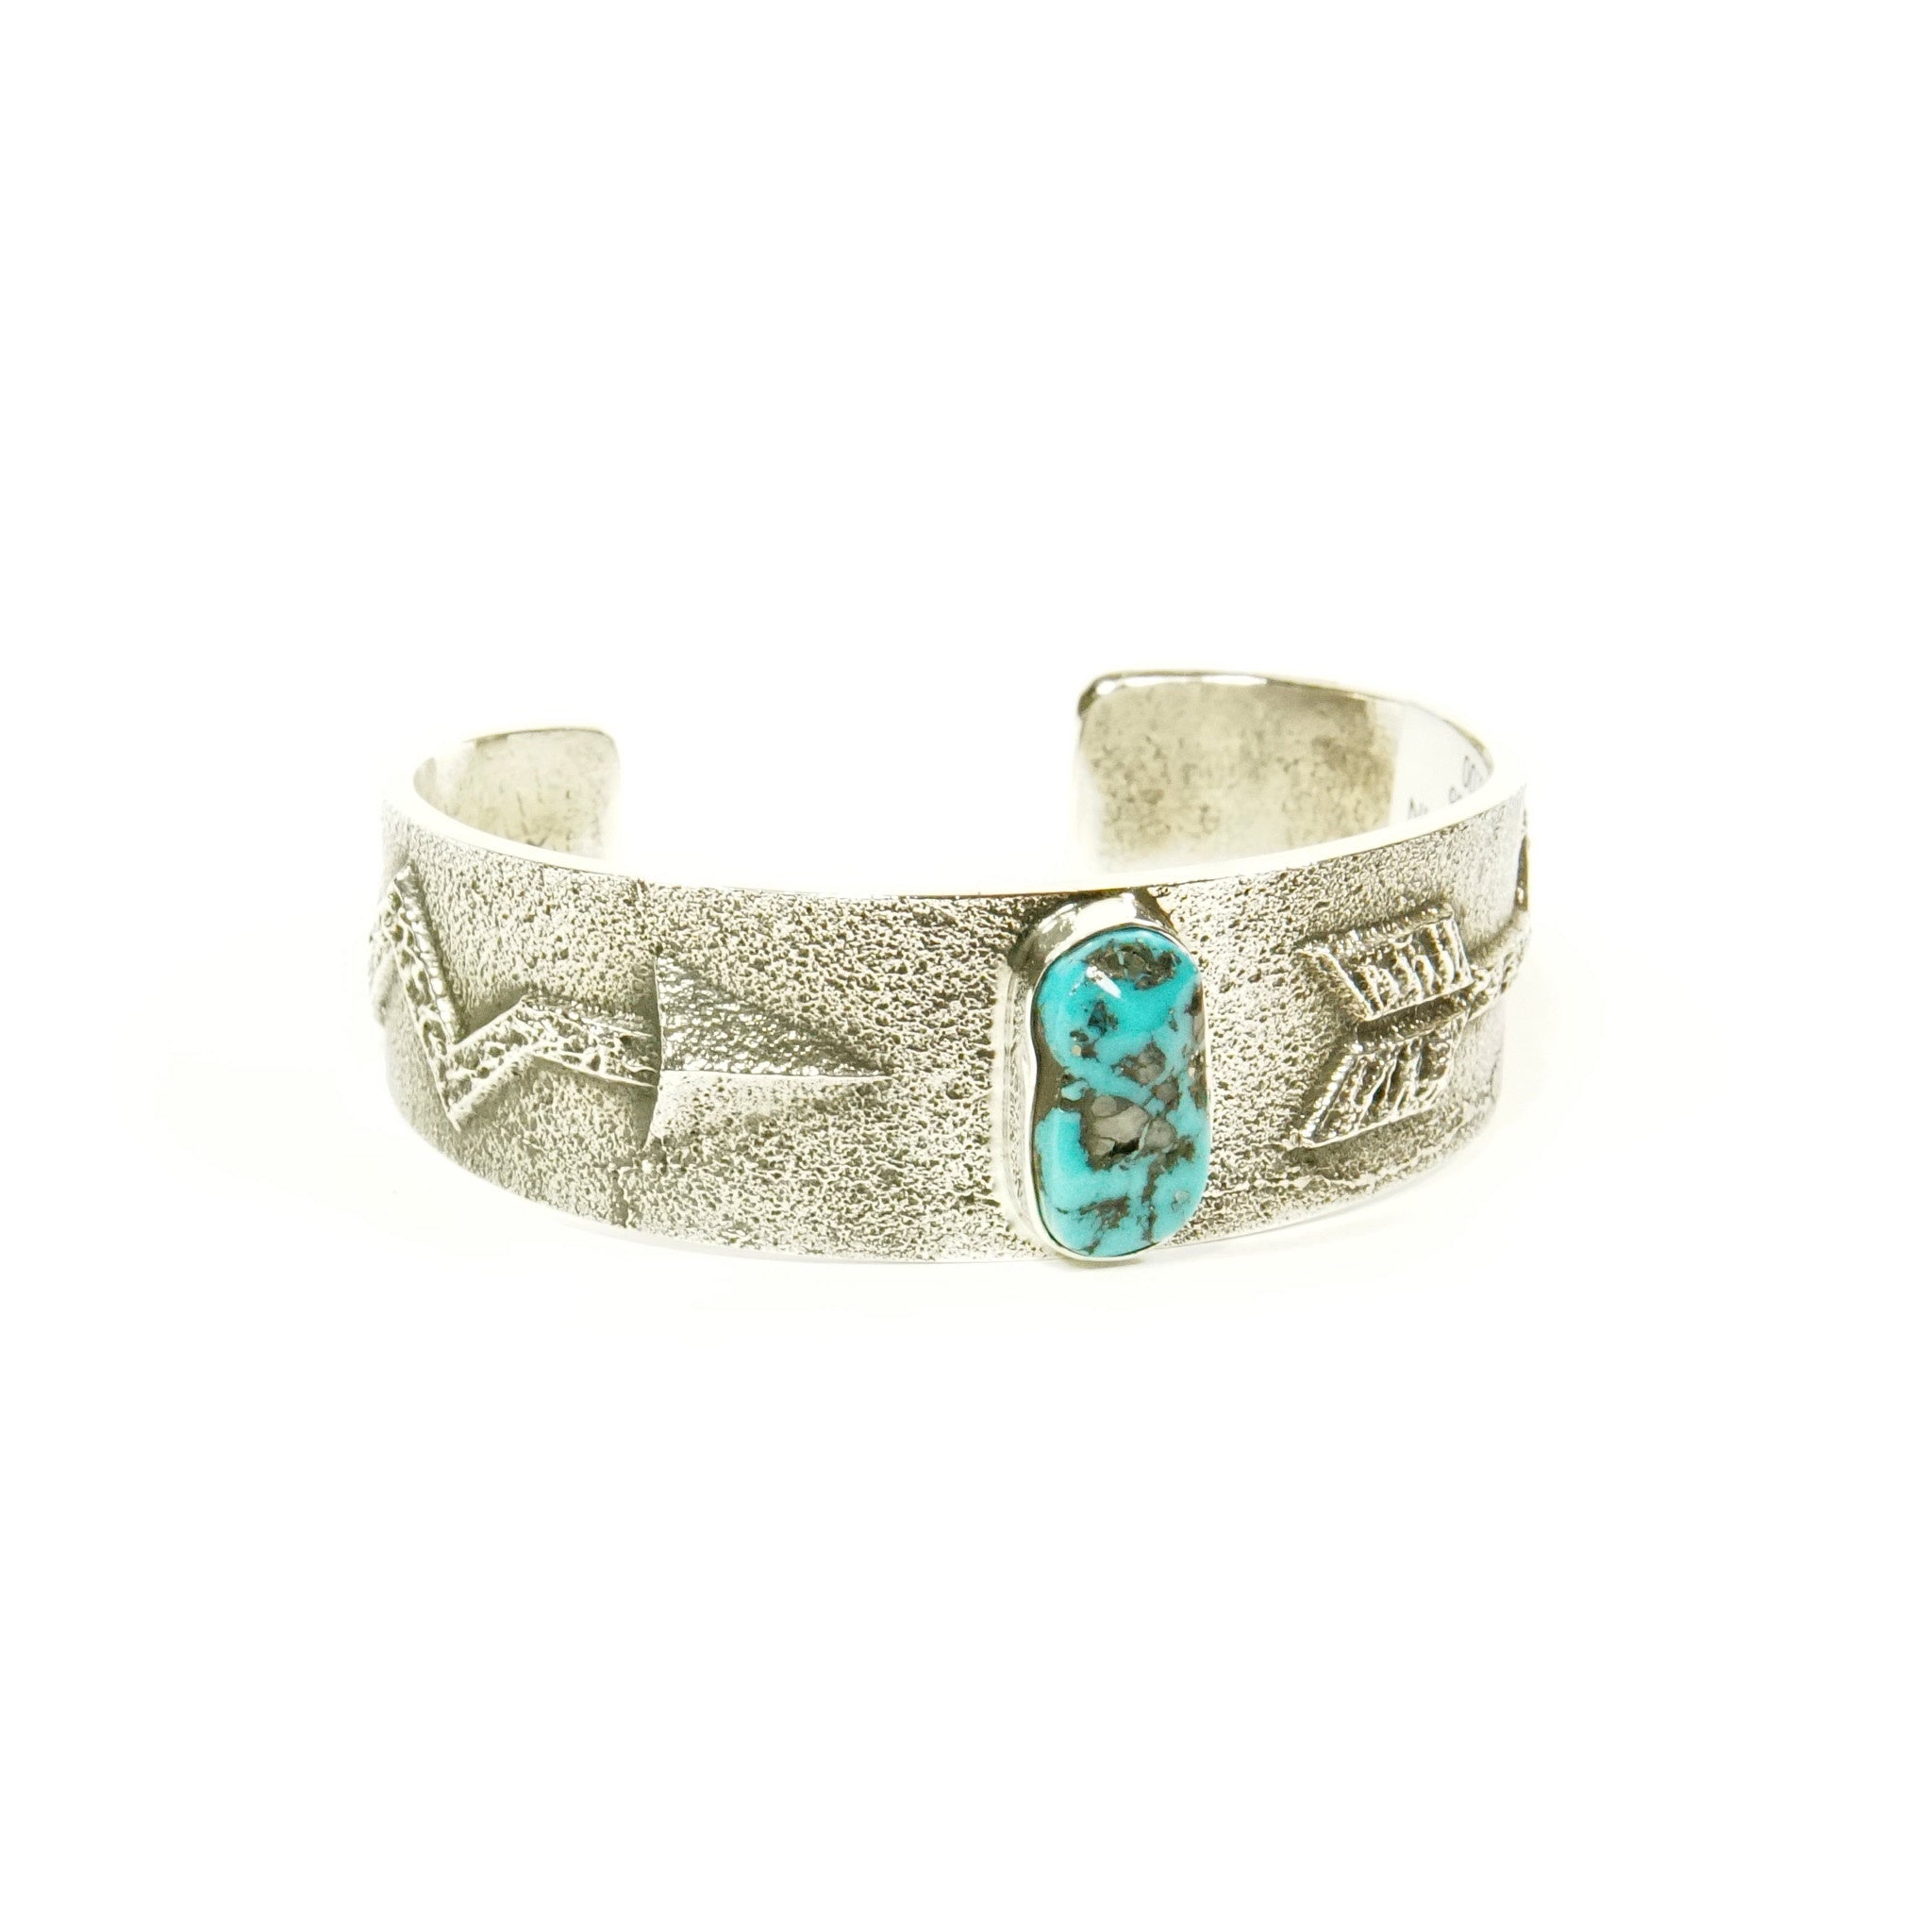 Kingman Turquoise Cuff by Kevin Yazzie